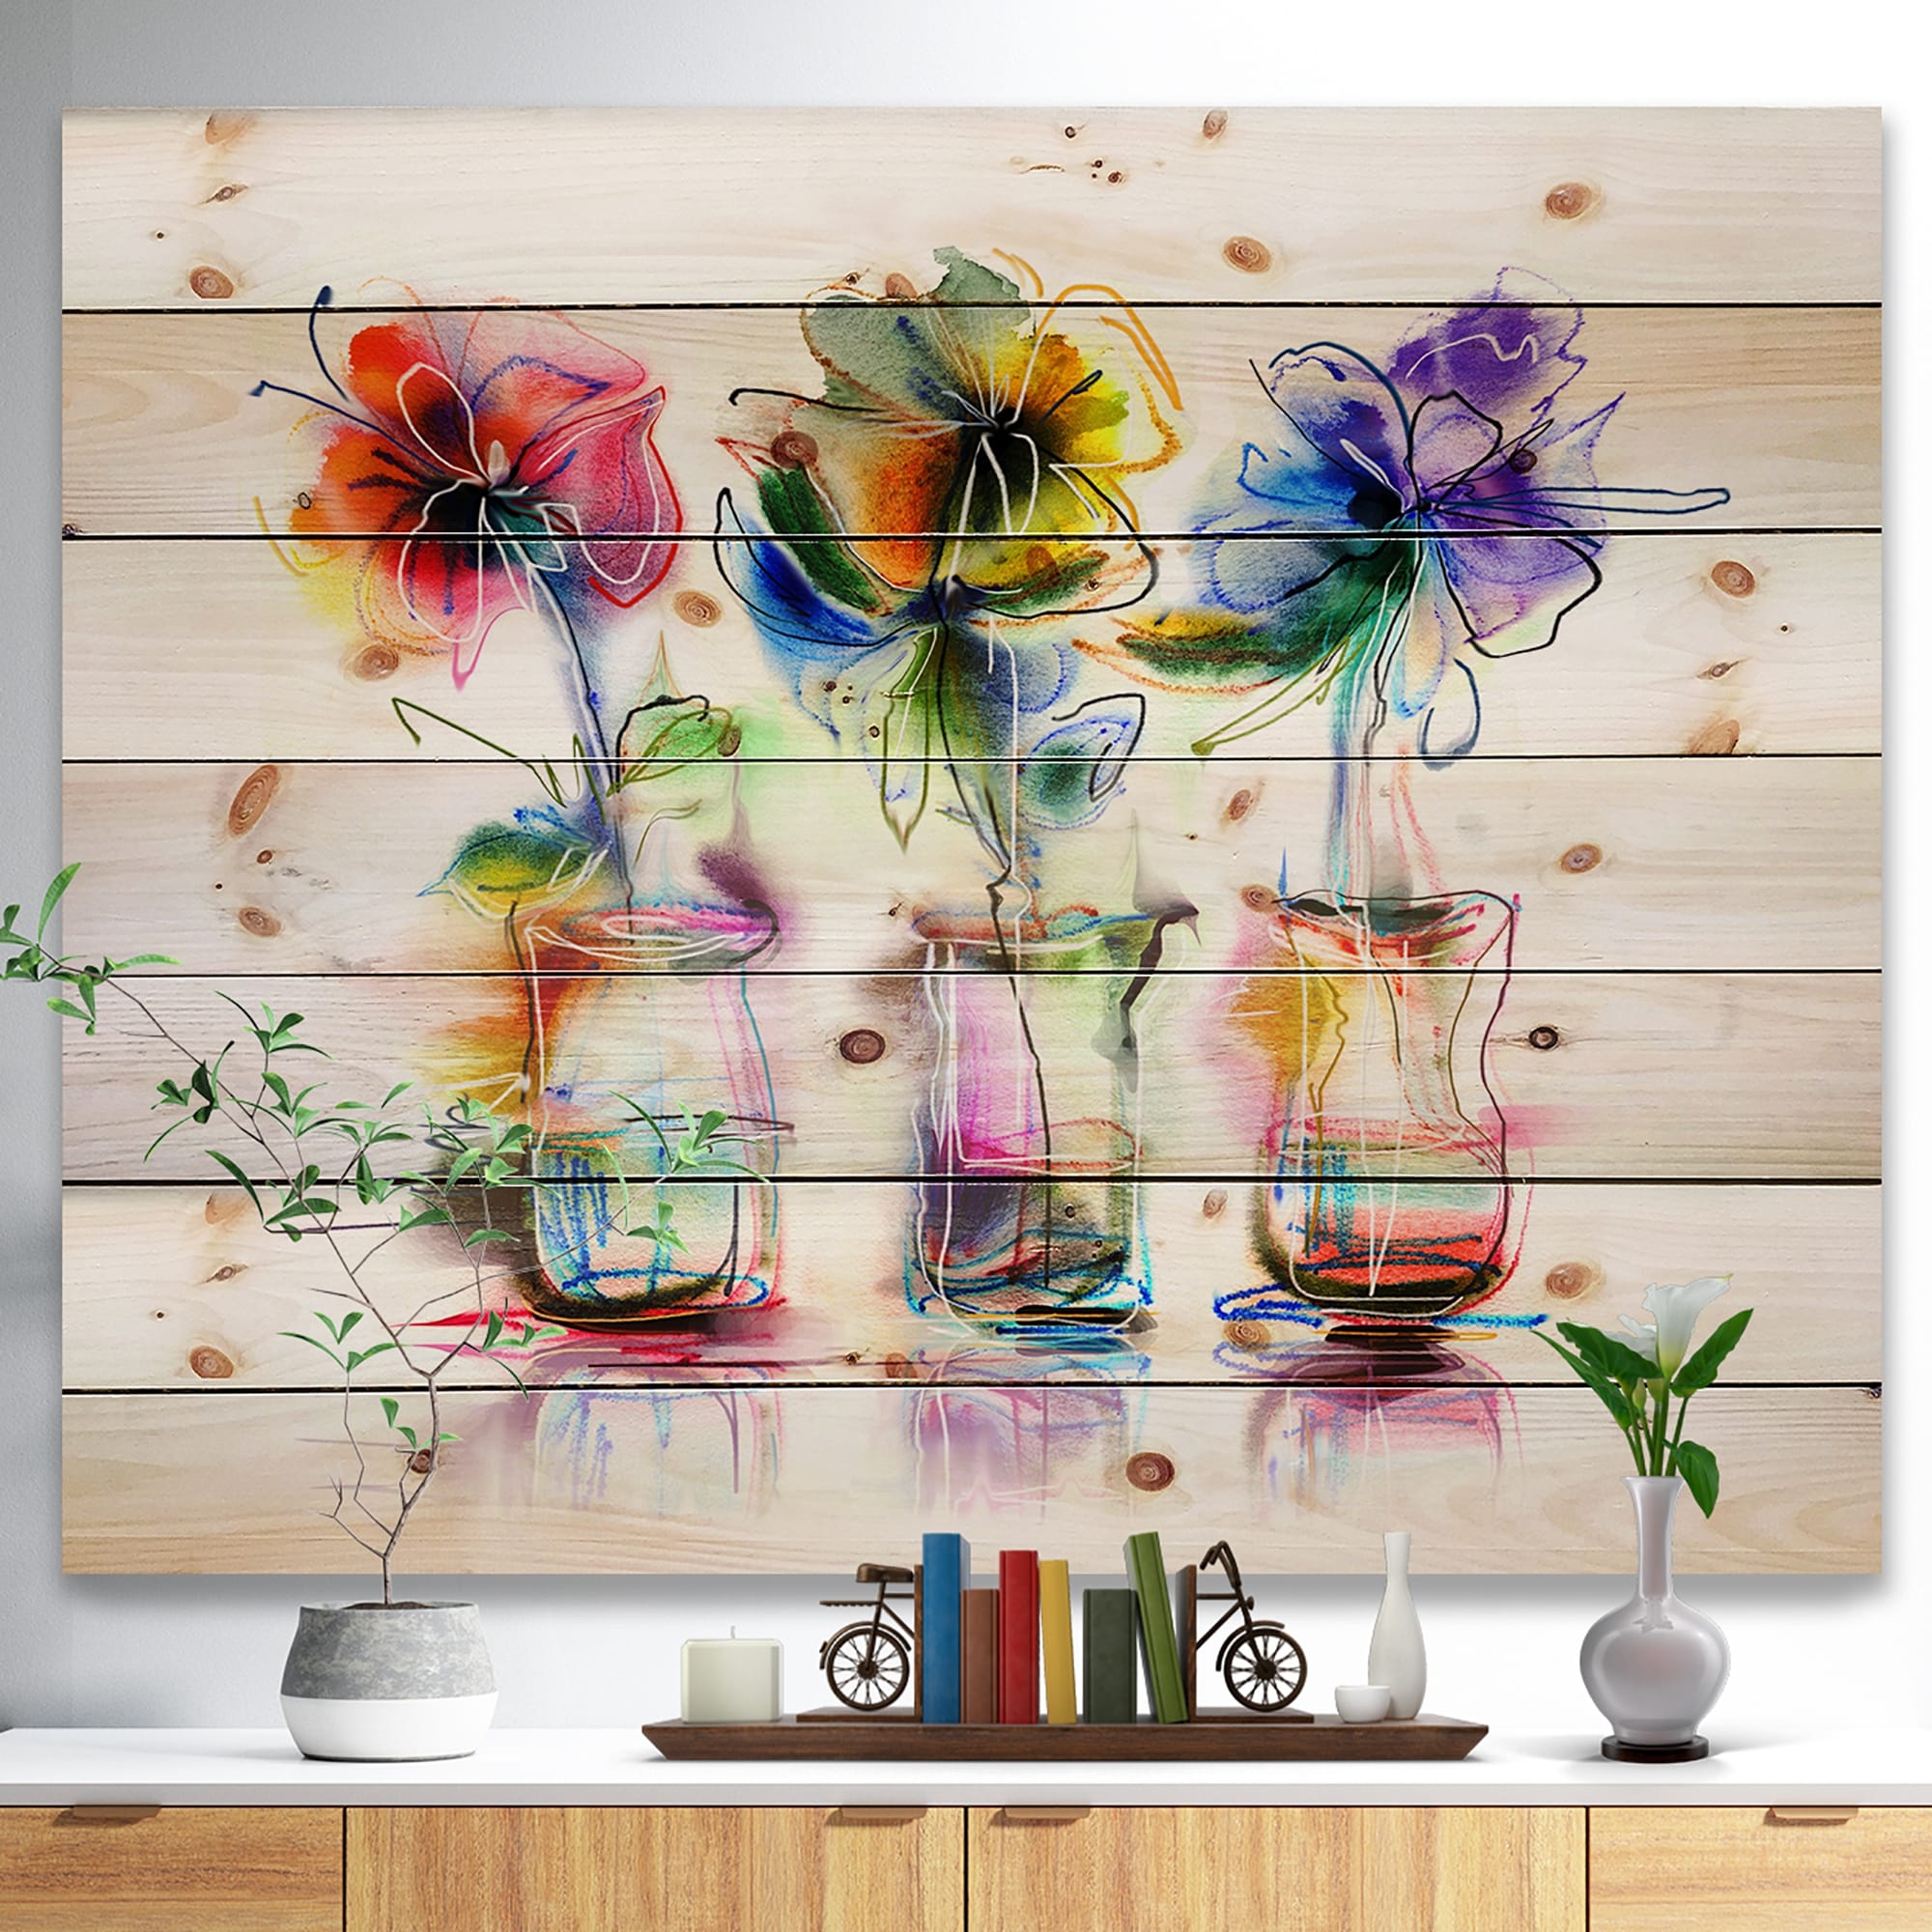 Designart 'Abstract Flowers In Glass Vases' Nautical  Coastal Wood Wall Art  Natural Pine Wood Bed Bath  Beyond 36738752